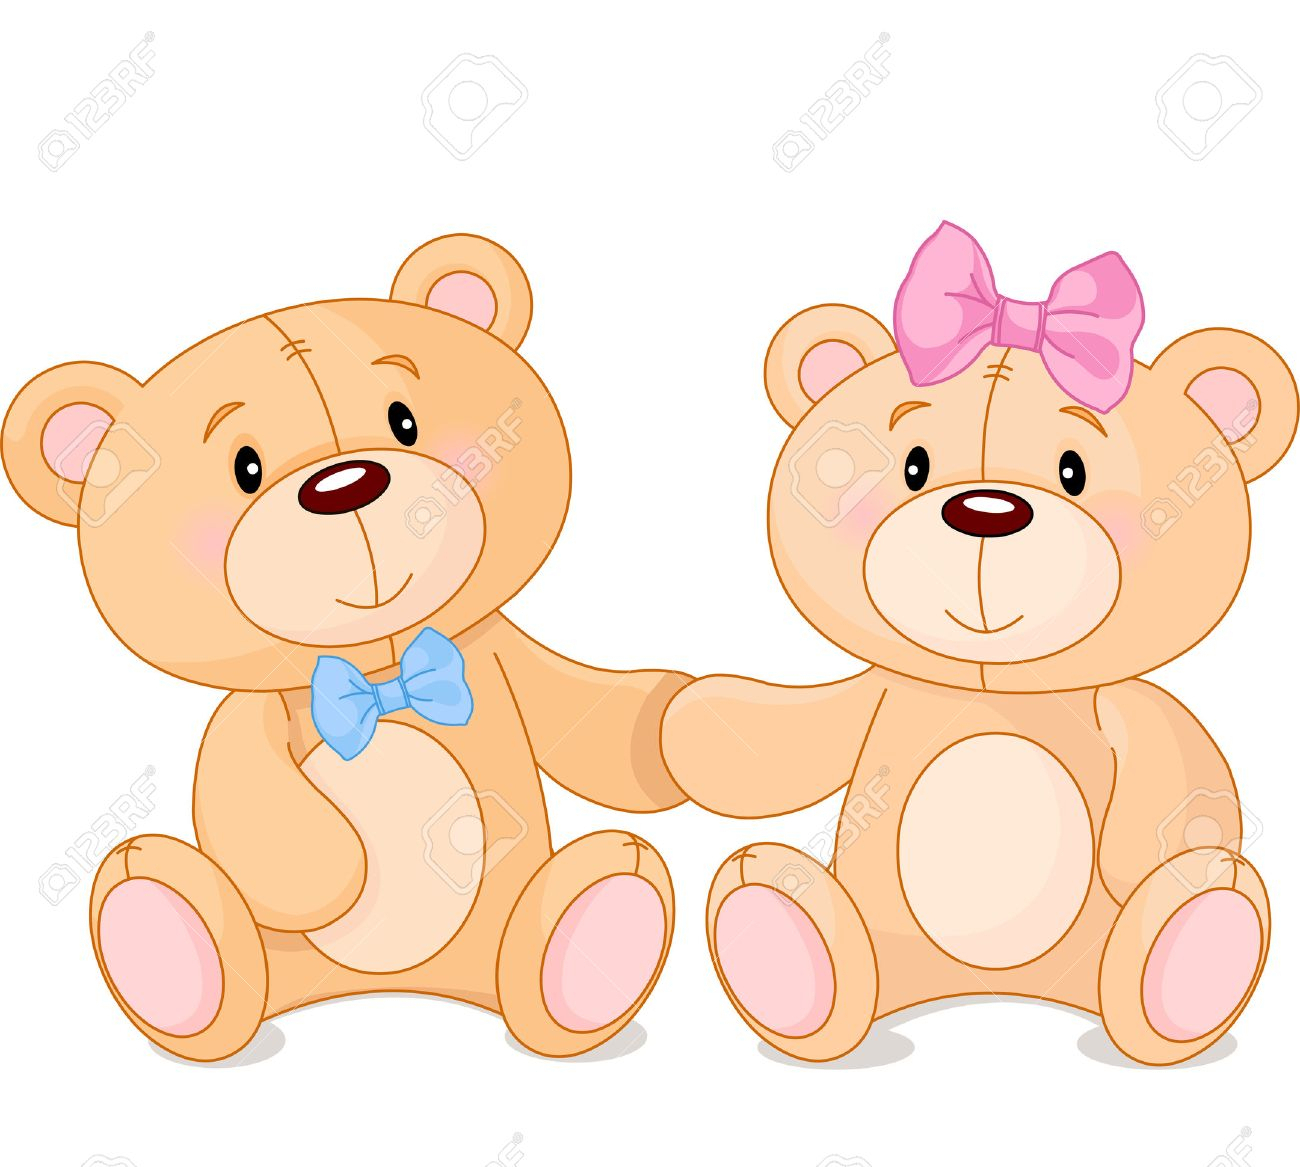 Teddy Bear Drawing Images - FOTO ~ IMAGES